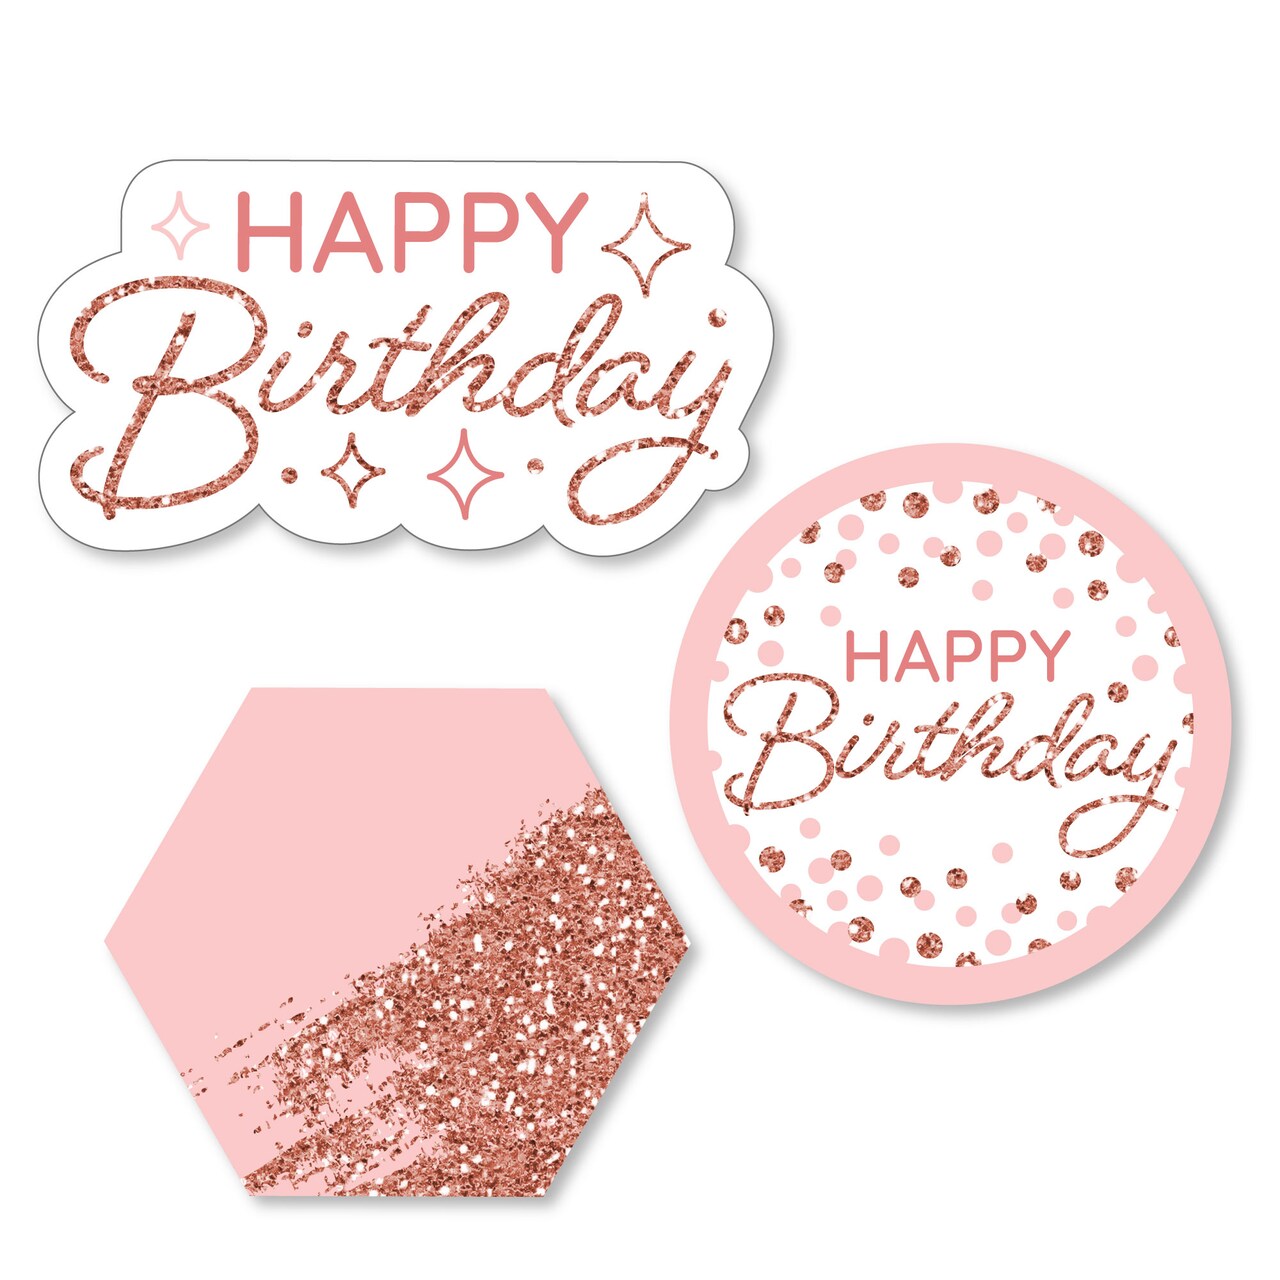 Big Dot of Happiness Pink Rose Gold Birthday - DIY Shaped Happy Birthday Party Cut-Outs - 24 Count